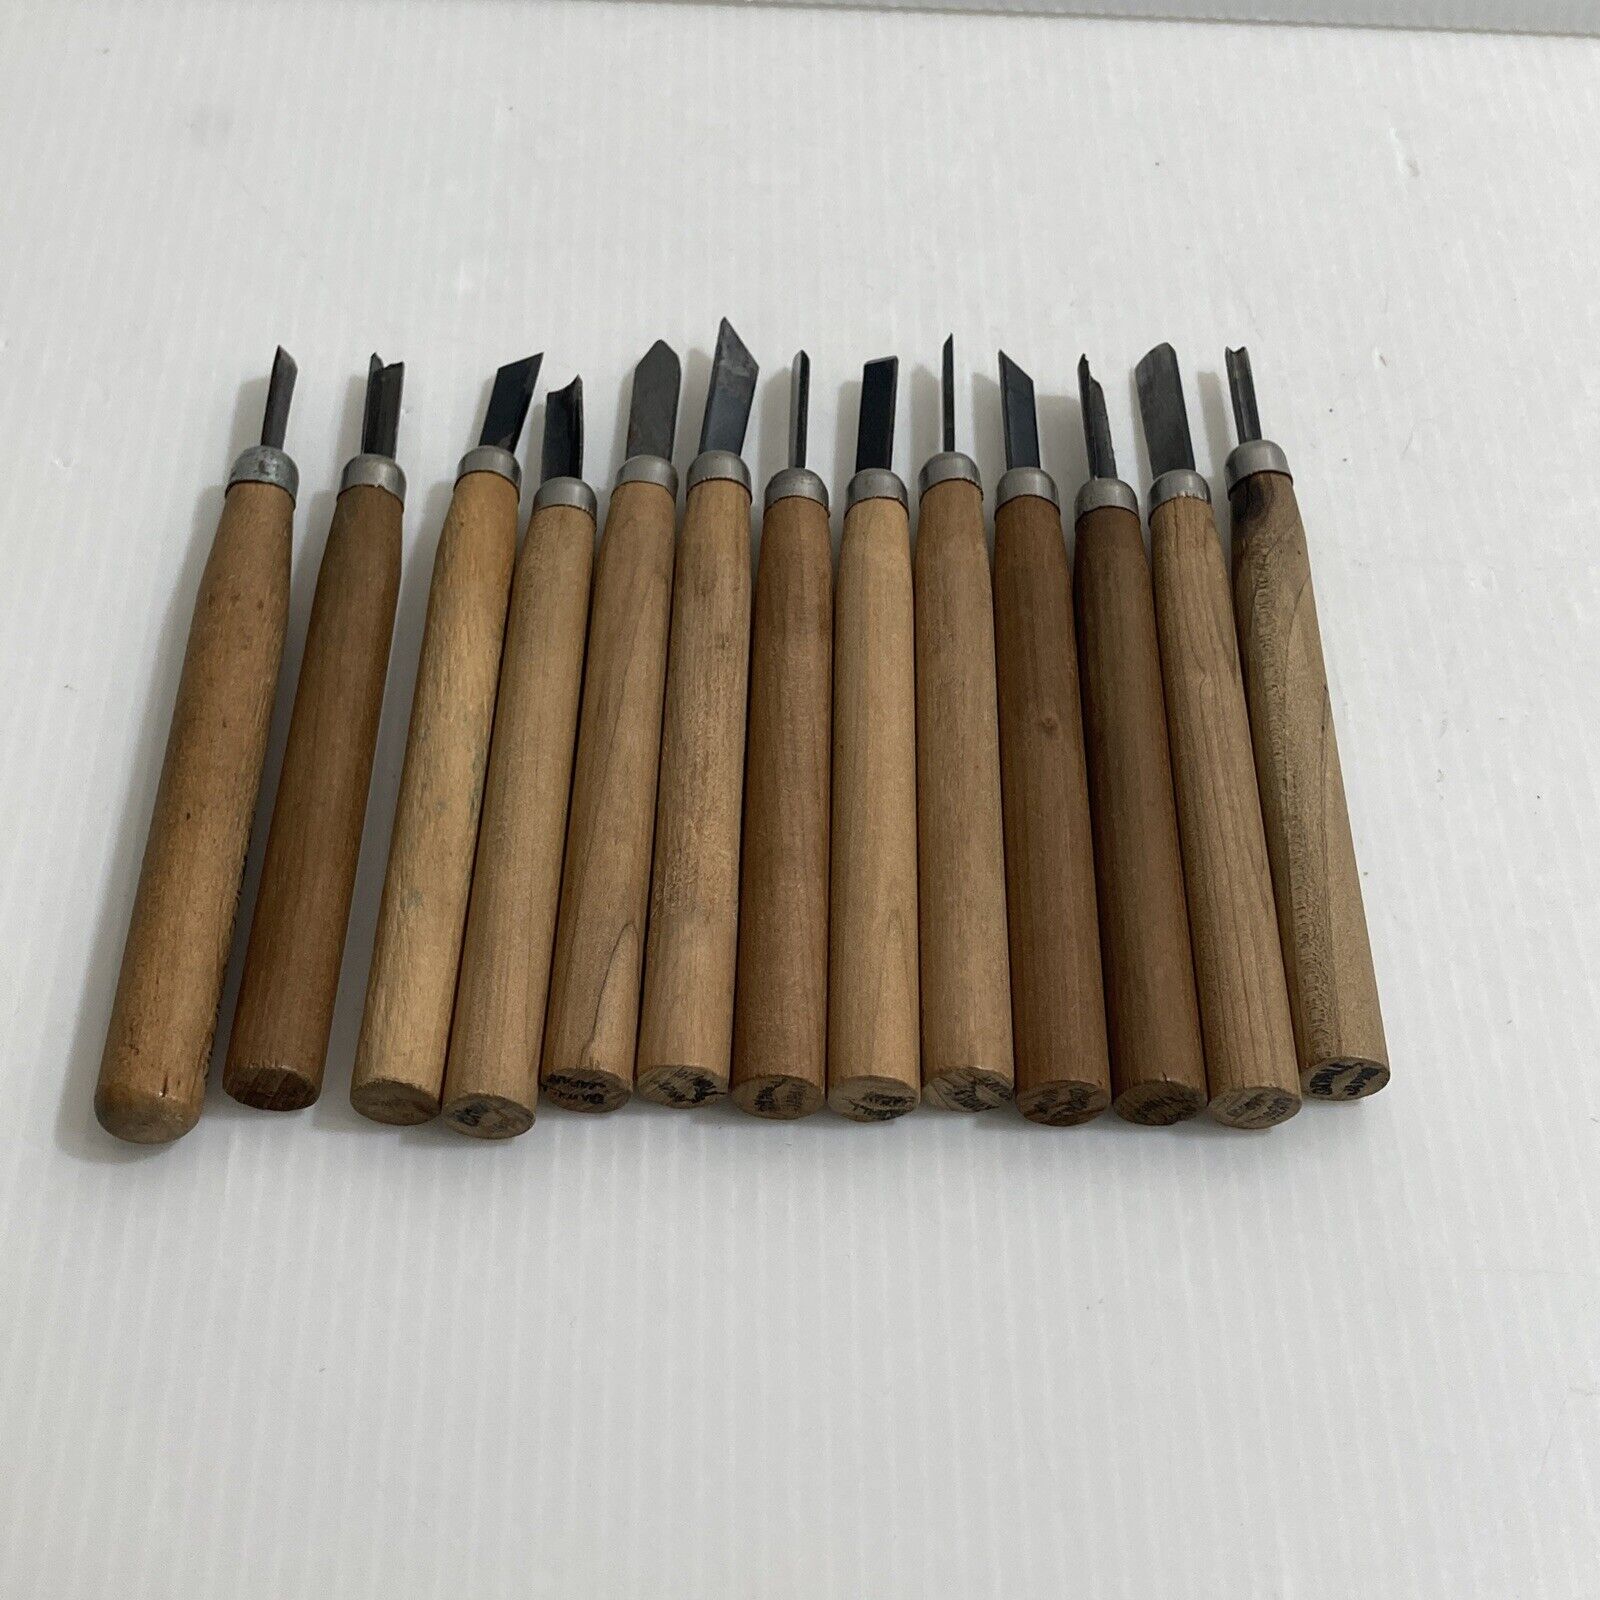 Vintage OXWALL 13 Piece Hobby Wood Carving Set Made In Japan